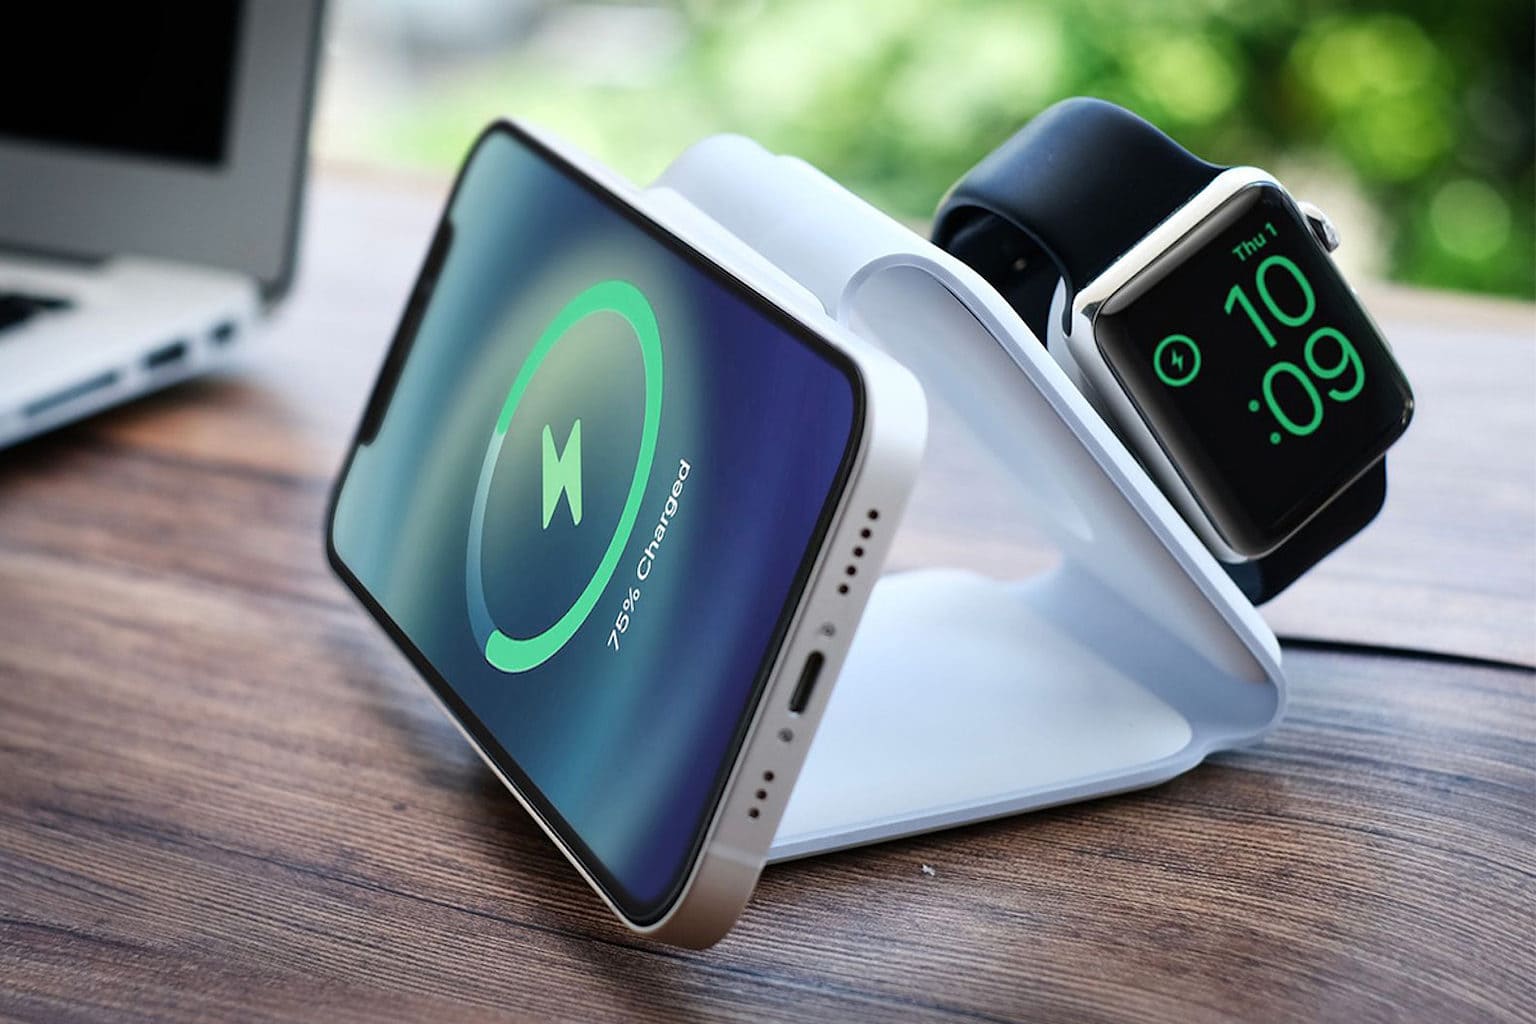 This compact wireless charger can power an iPhone, AirPods and Apple Watch at the same time.